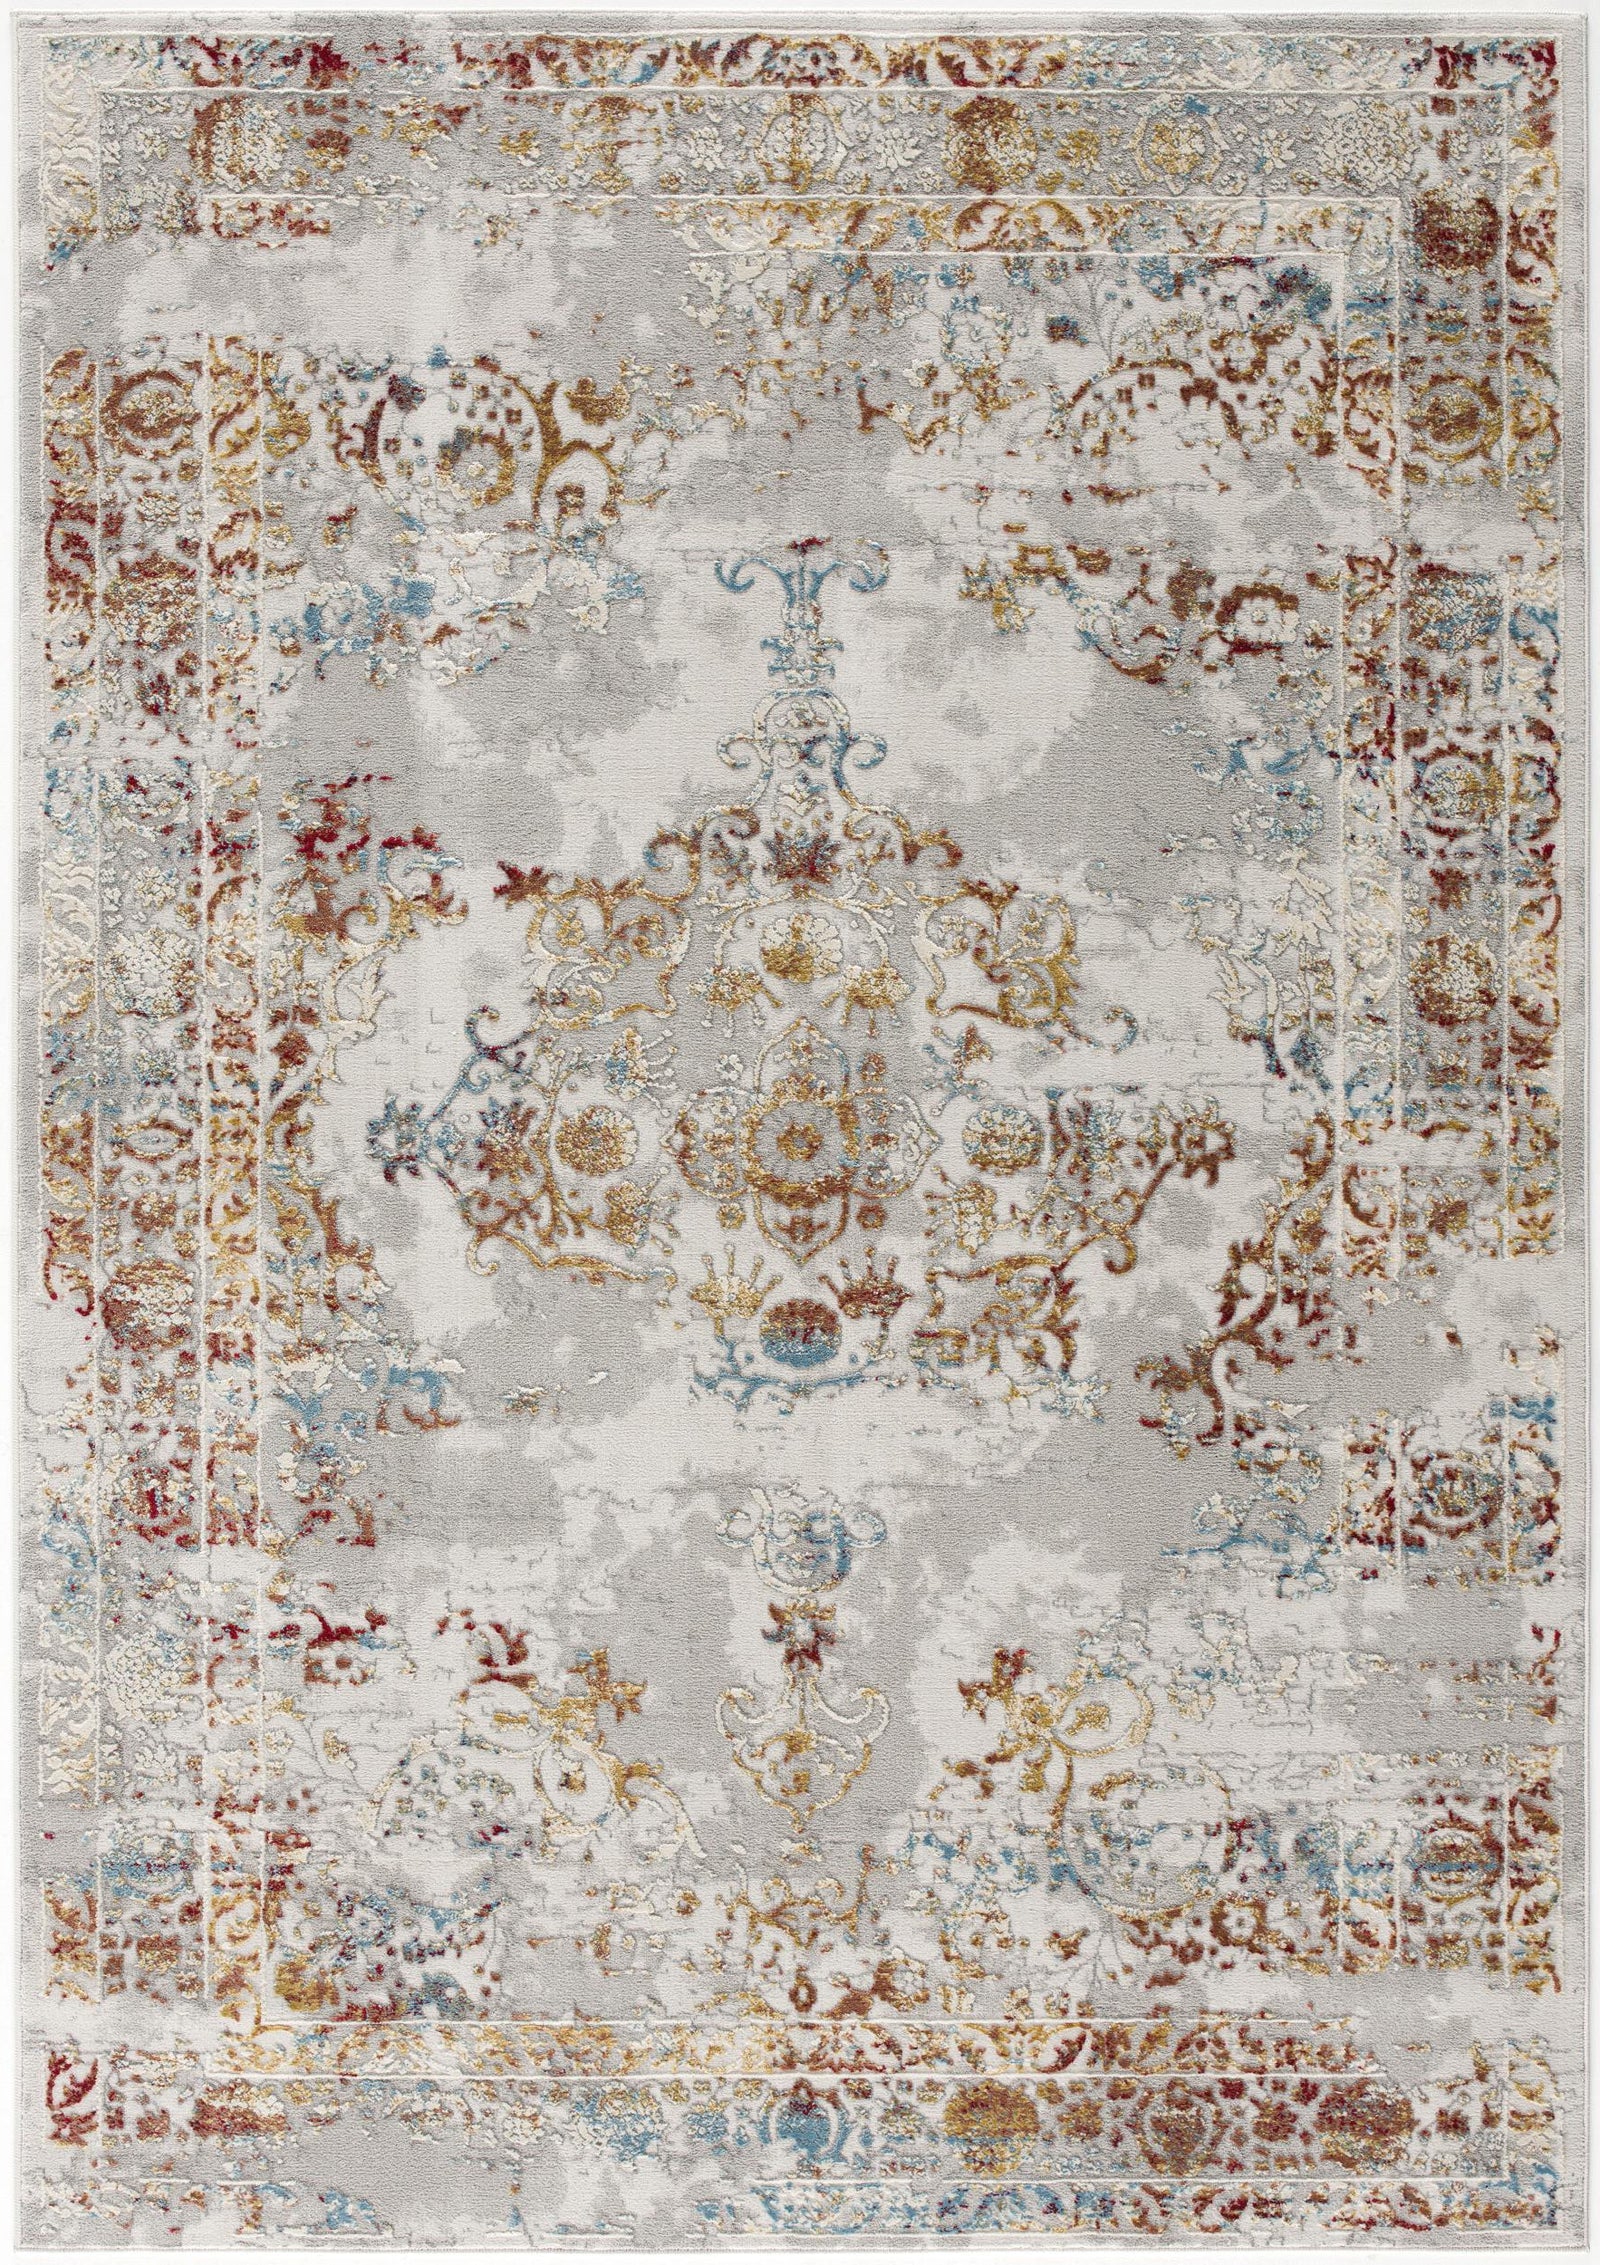 3’ X 5’ Gray And Beige Distressed Ornate Area Rug